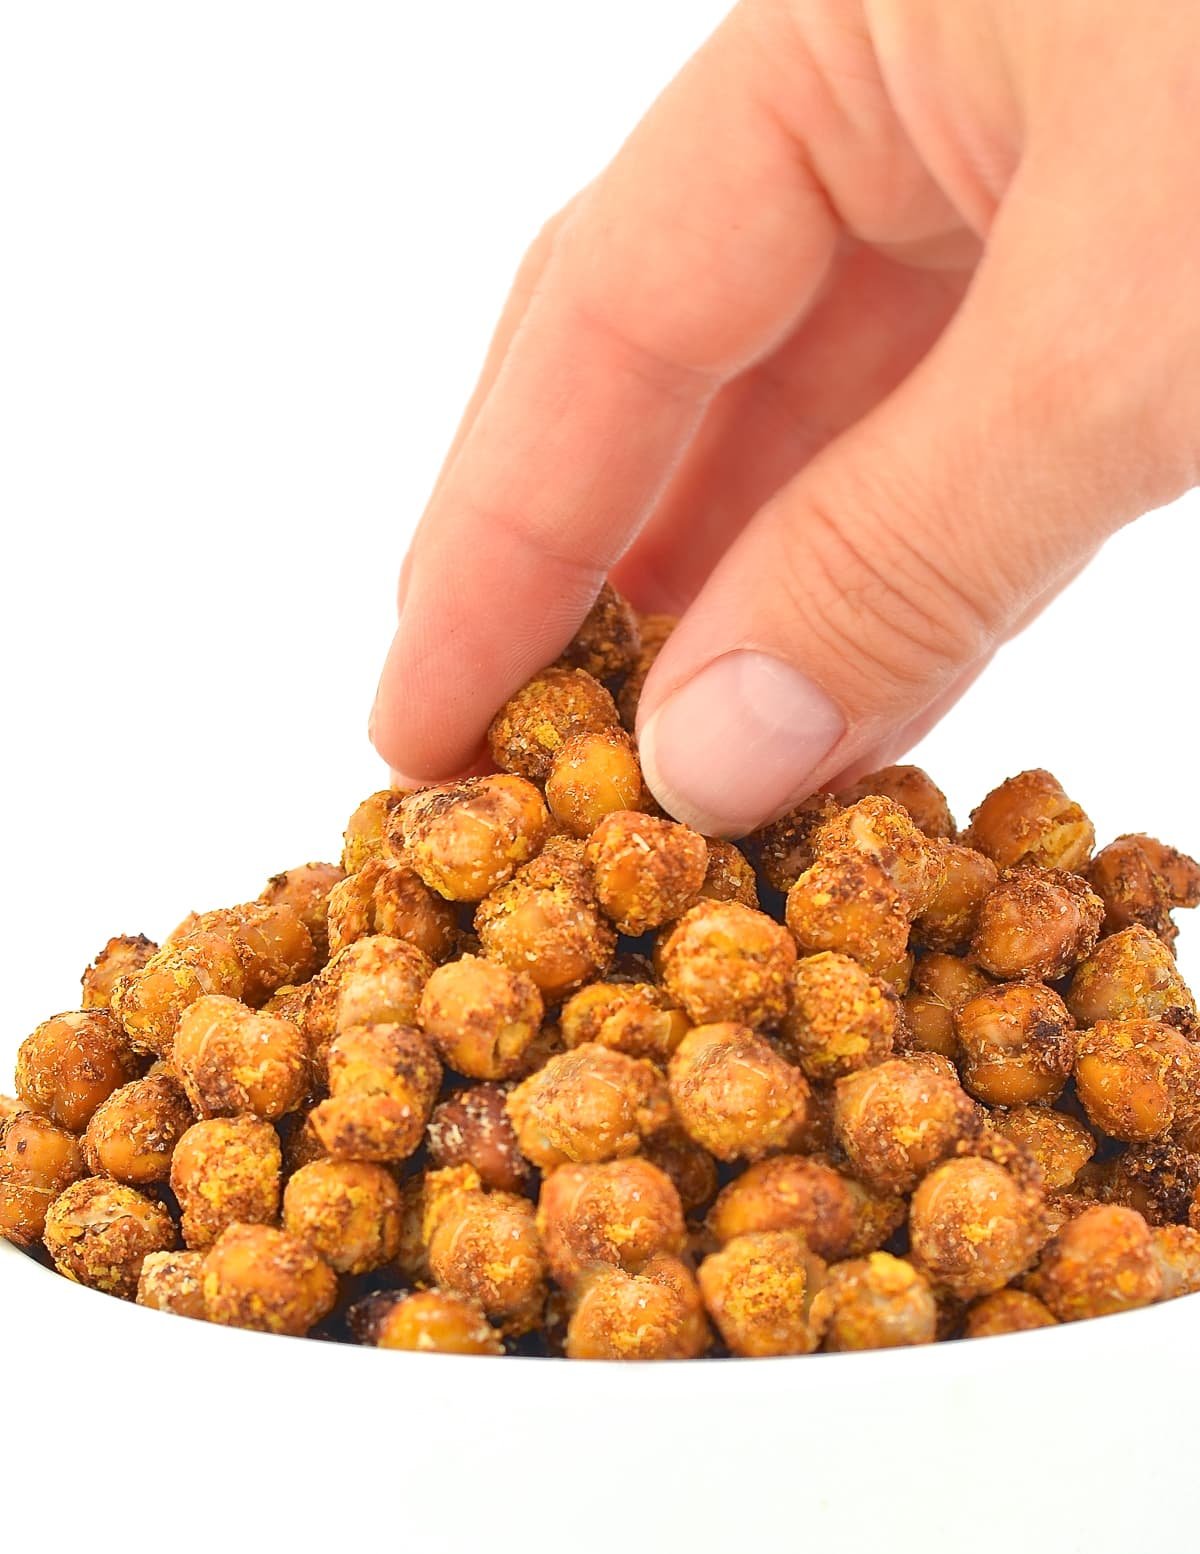 a hand taking some crispy chickpeas from a white bowl